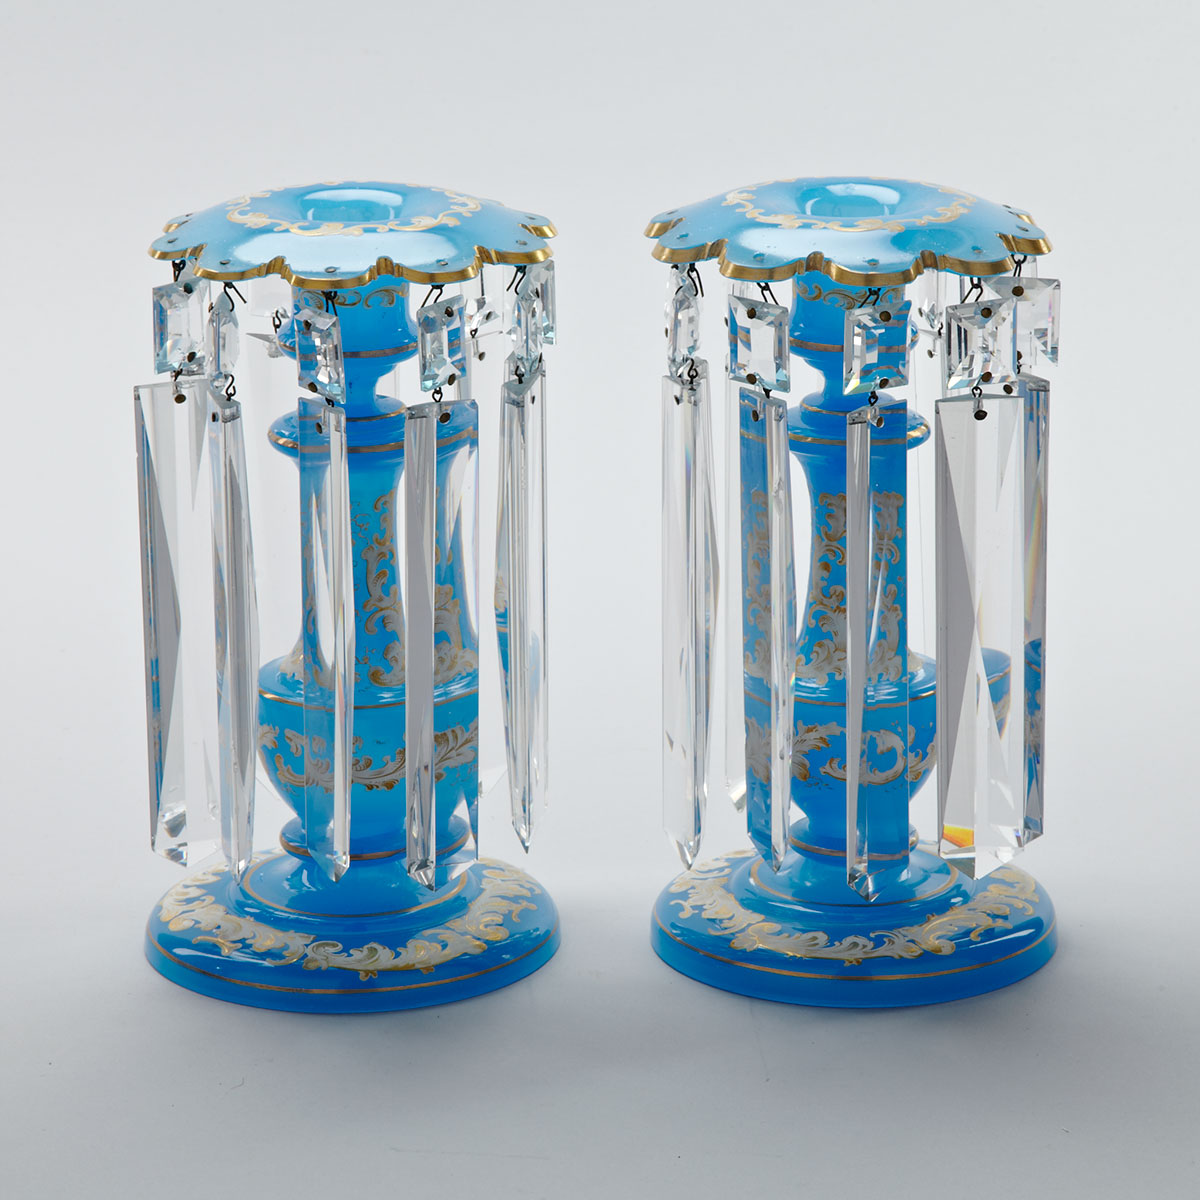 Pair of Bohemian Enameled and Gilt Opaque Blue Glass Lustres, late 19th century